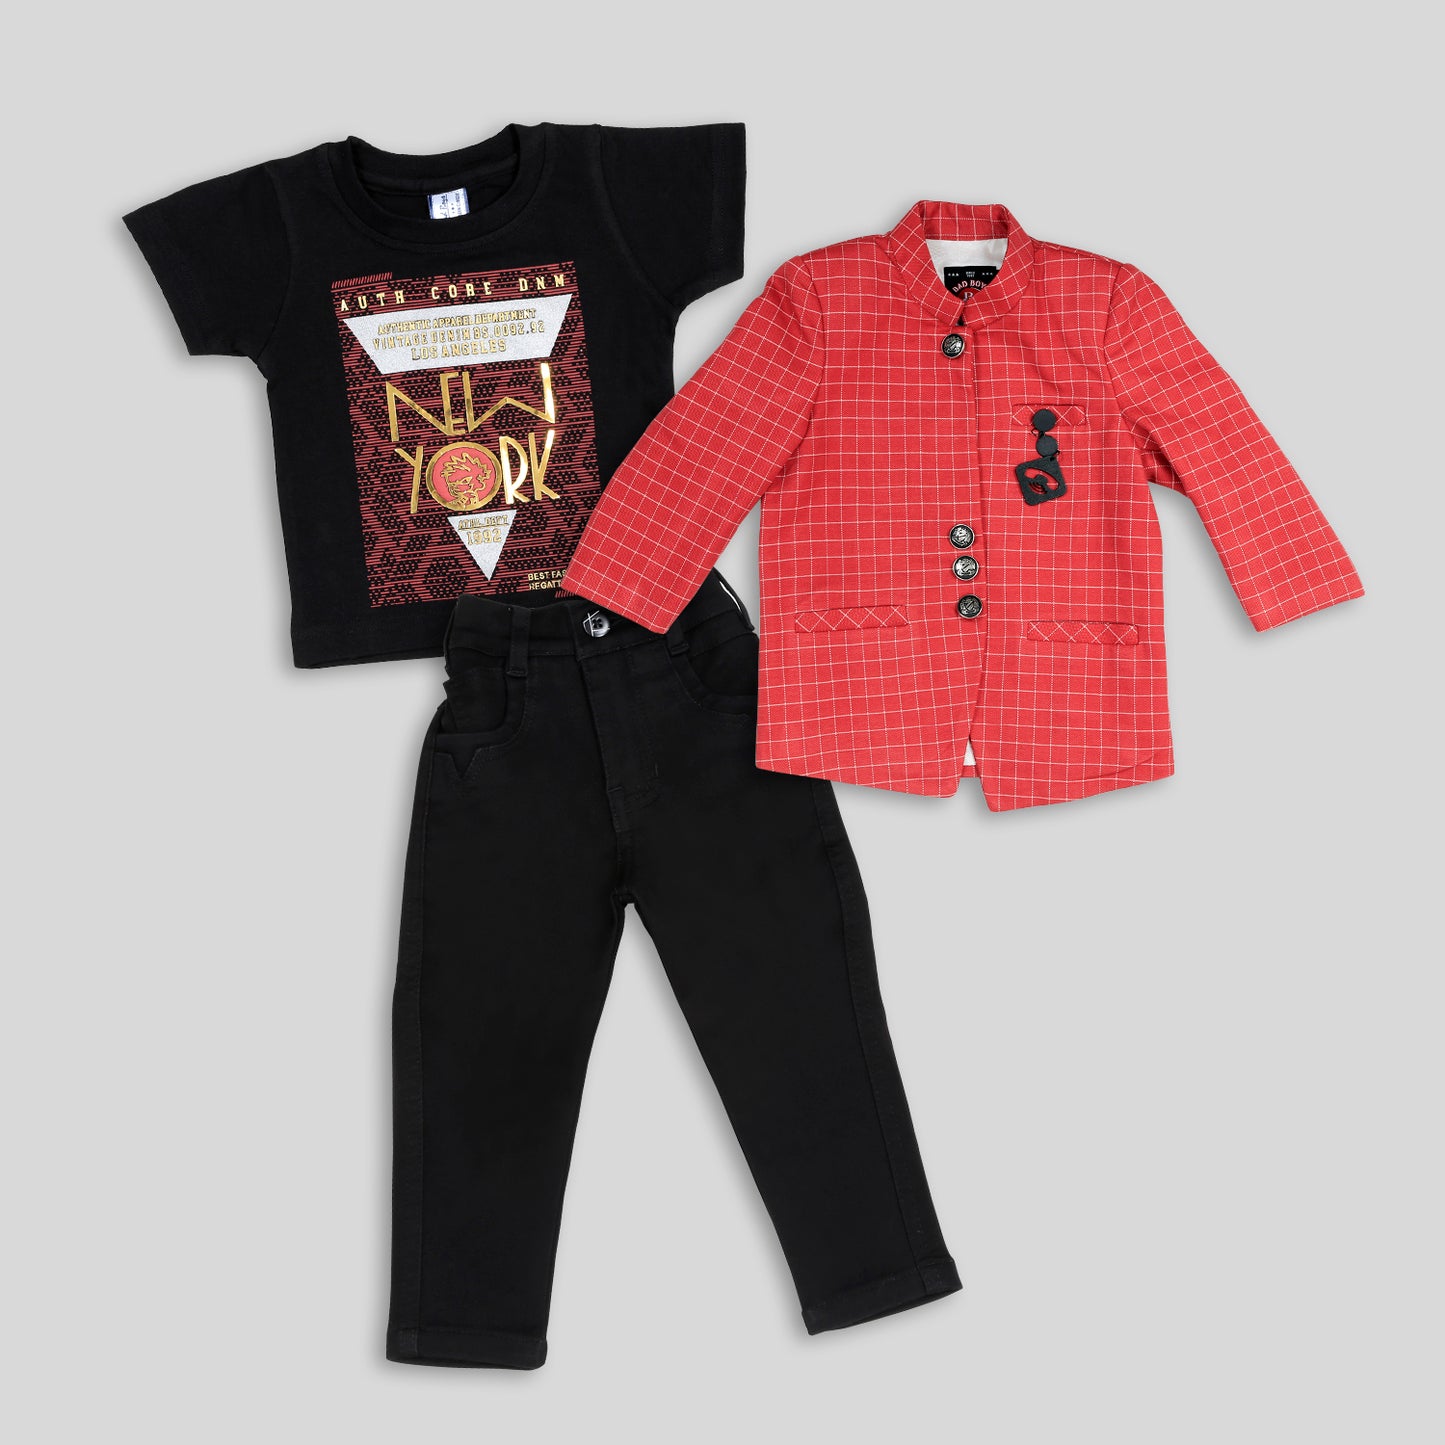 Party Wear Set With Blazer, T-shirt & Bottoms.